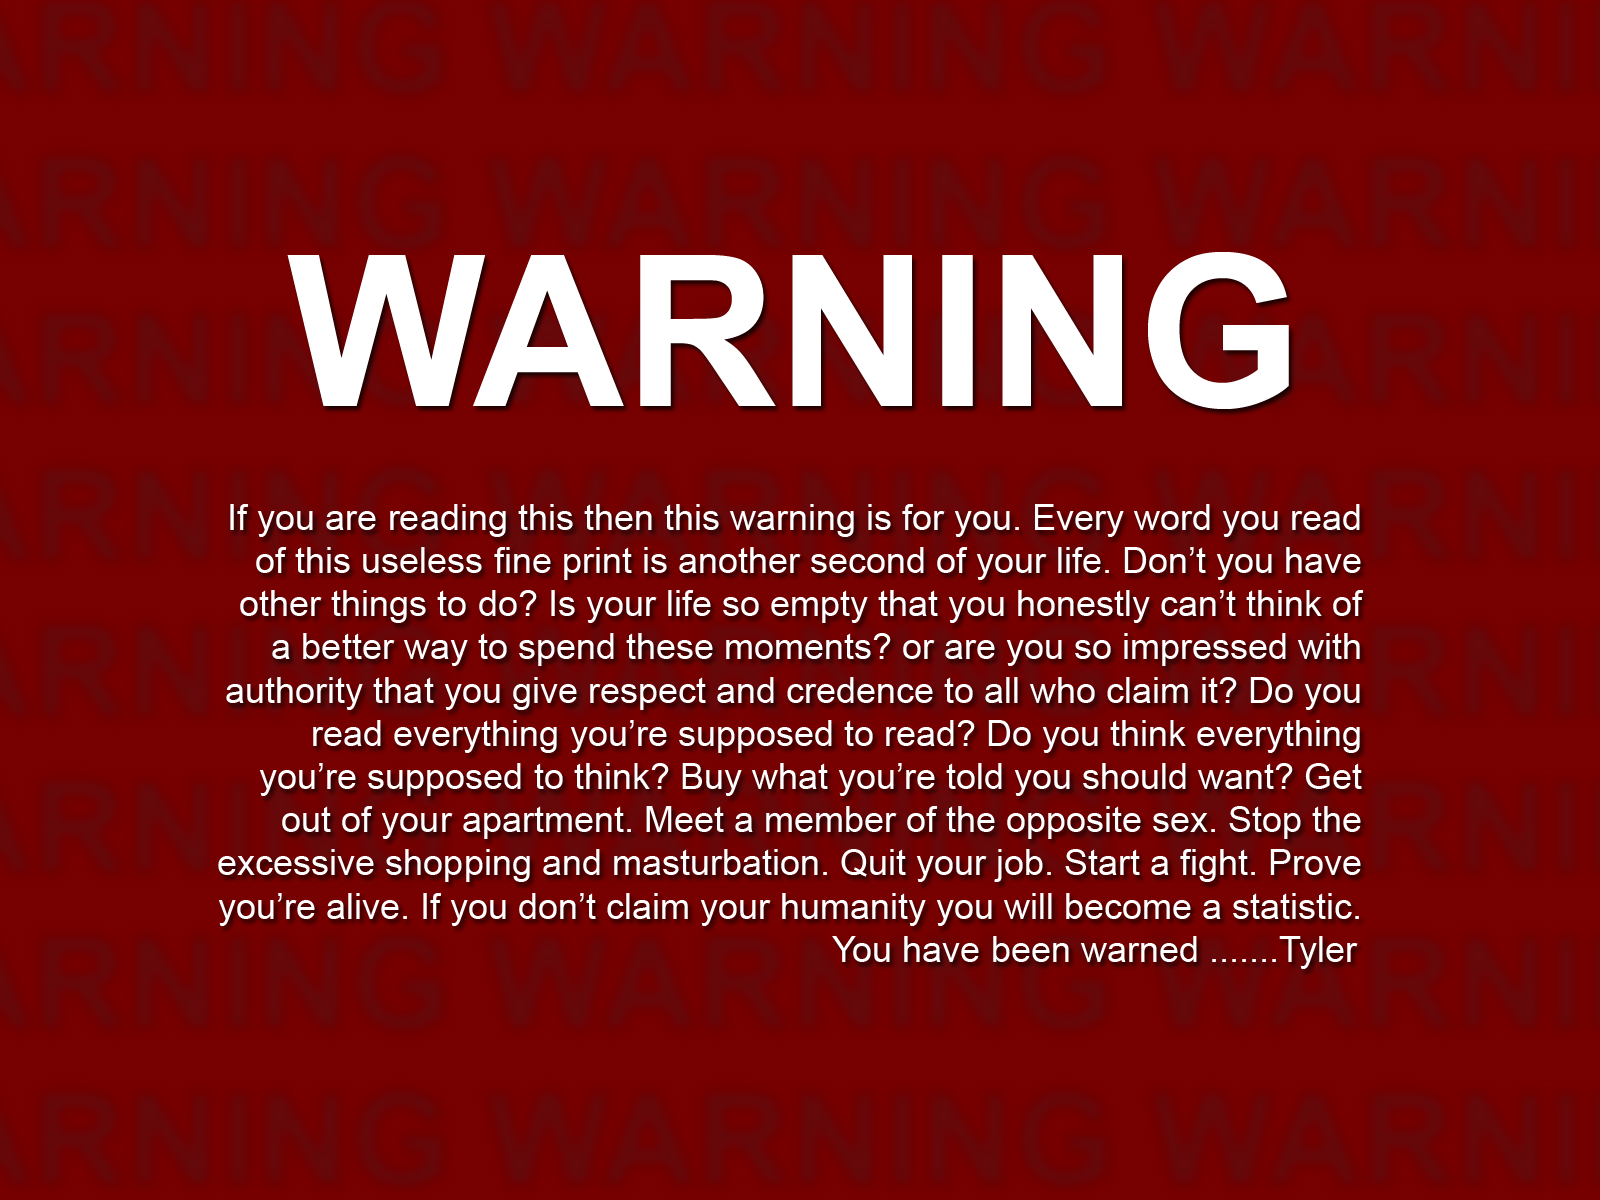 Warning v20 by freoment on